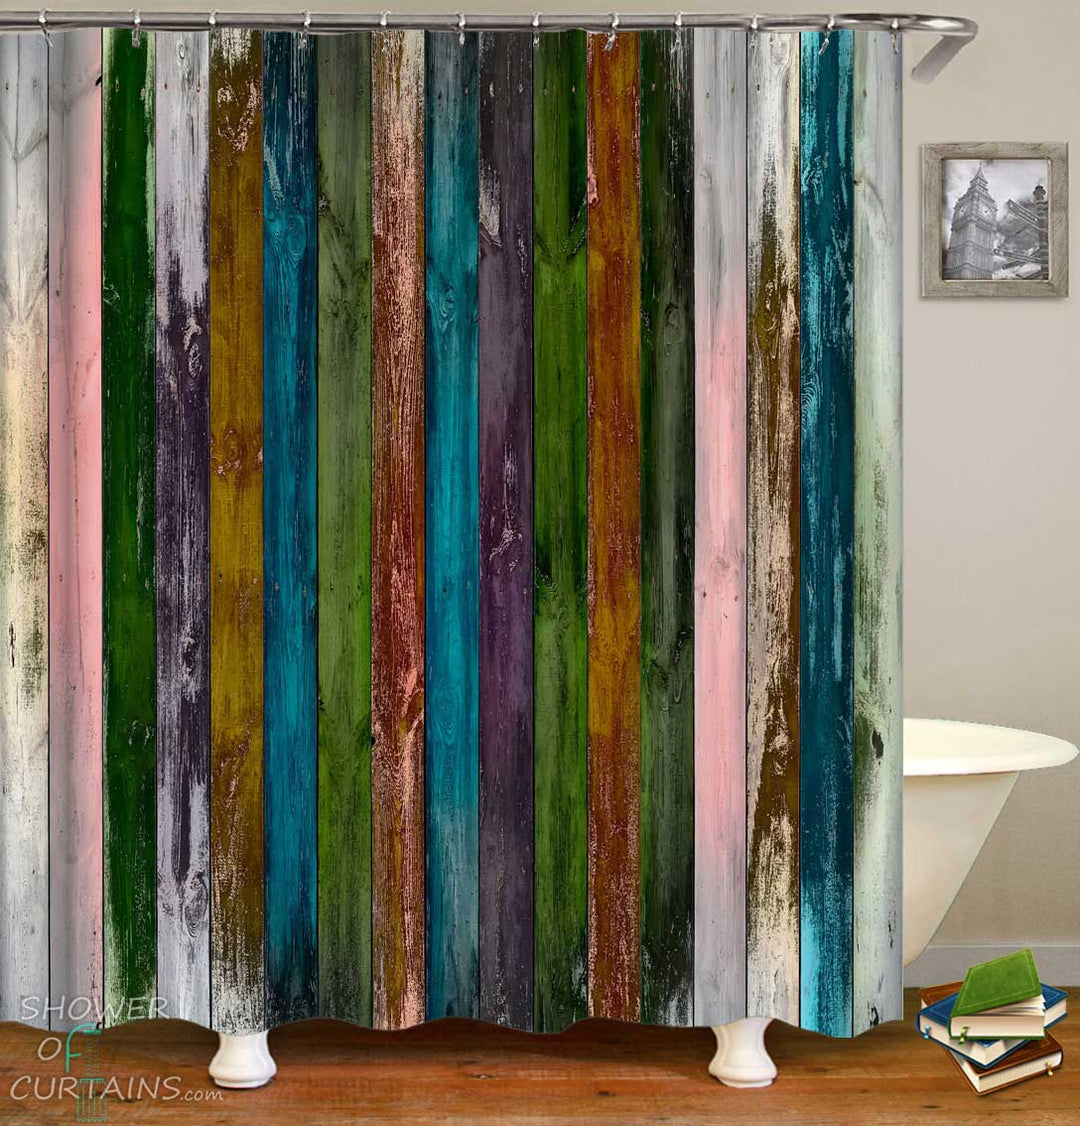 Shower Curtains with Multi Colored Worn Wooden Deck